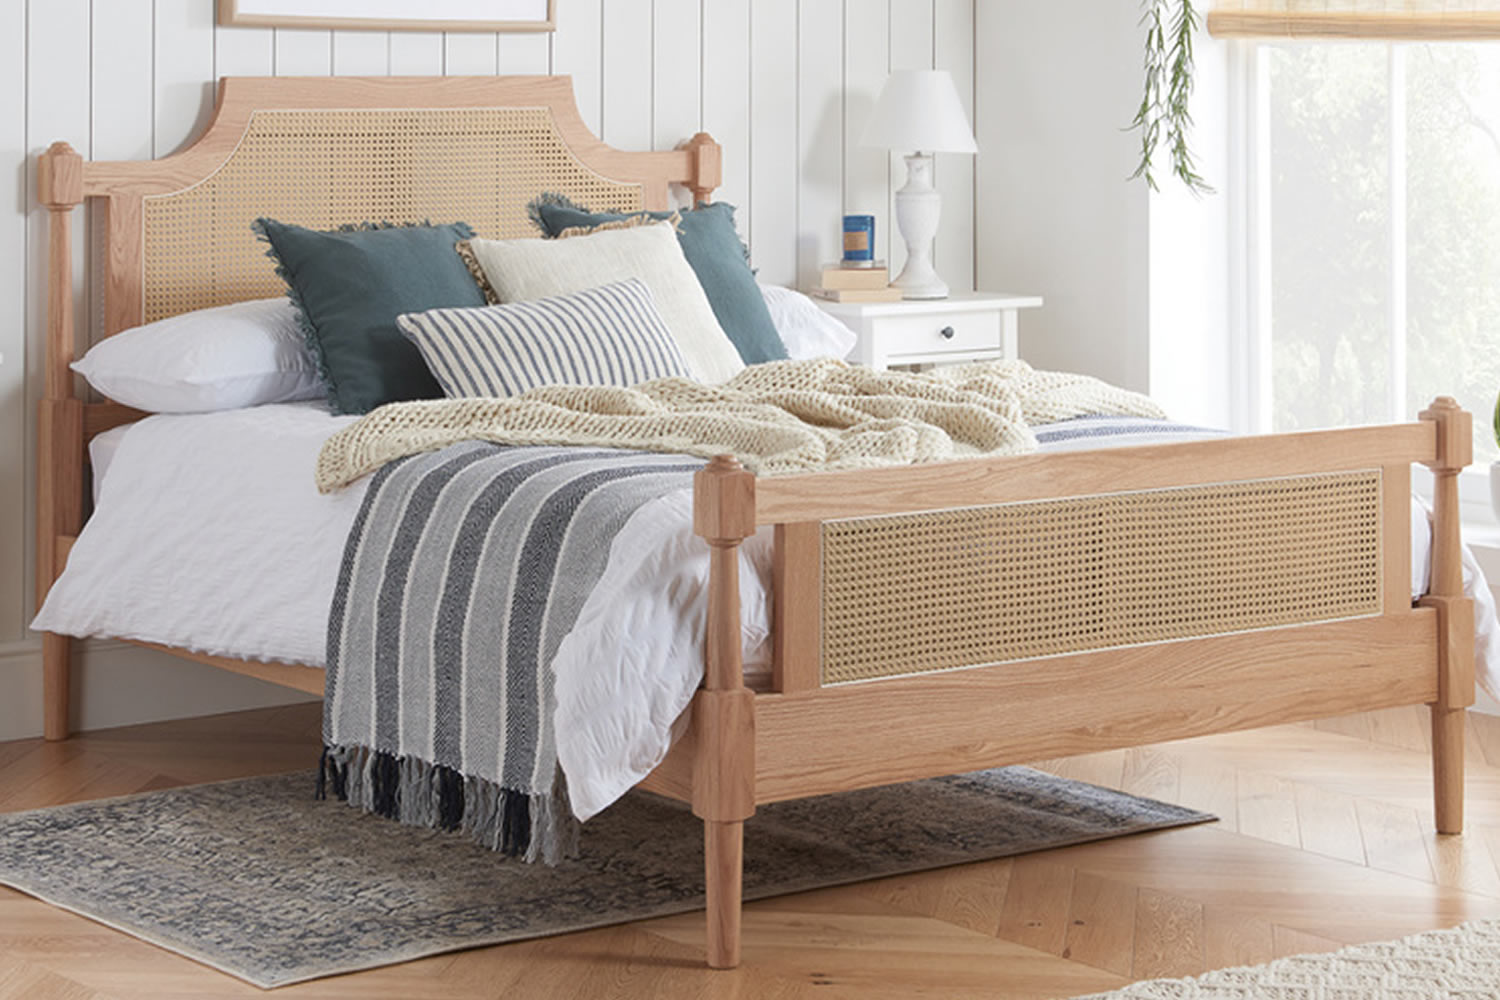 View Geneva Wooden Rattan 46 Double Size Bed Frame Crafted From Solid Oak Rattan Headboard Foot End Sturdy Legs Sprung Slatted Base information